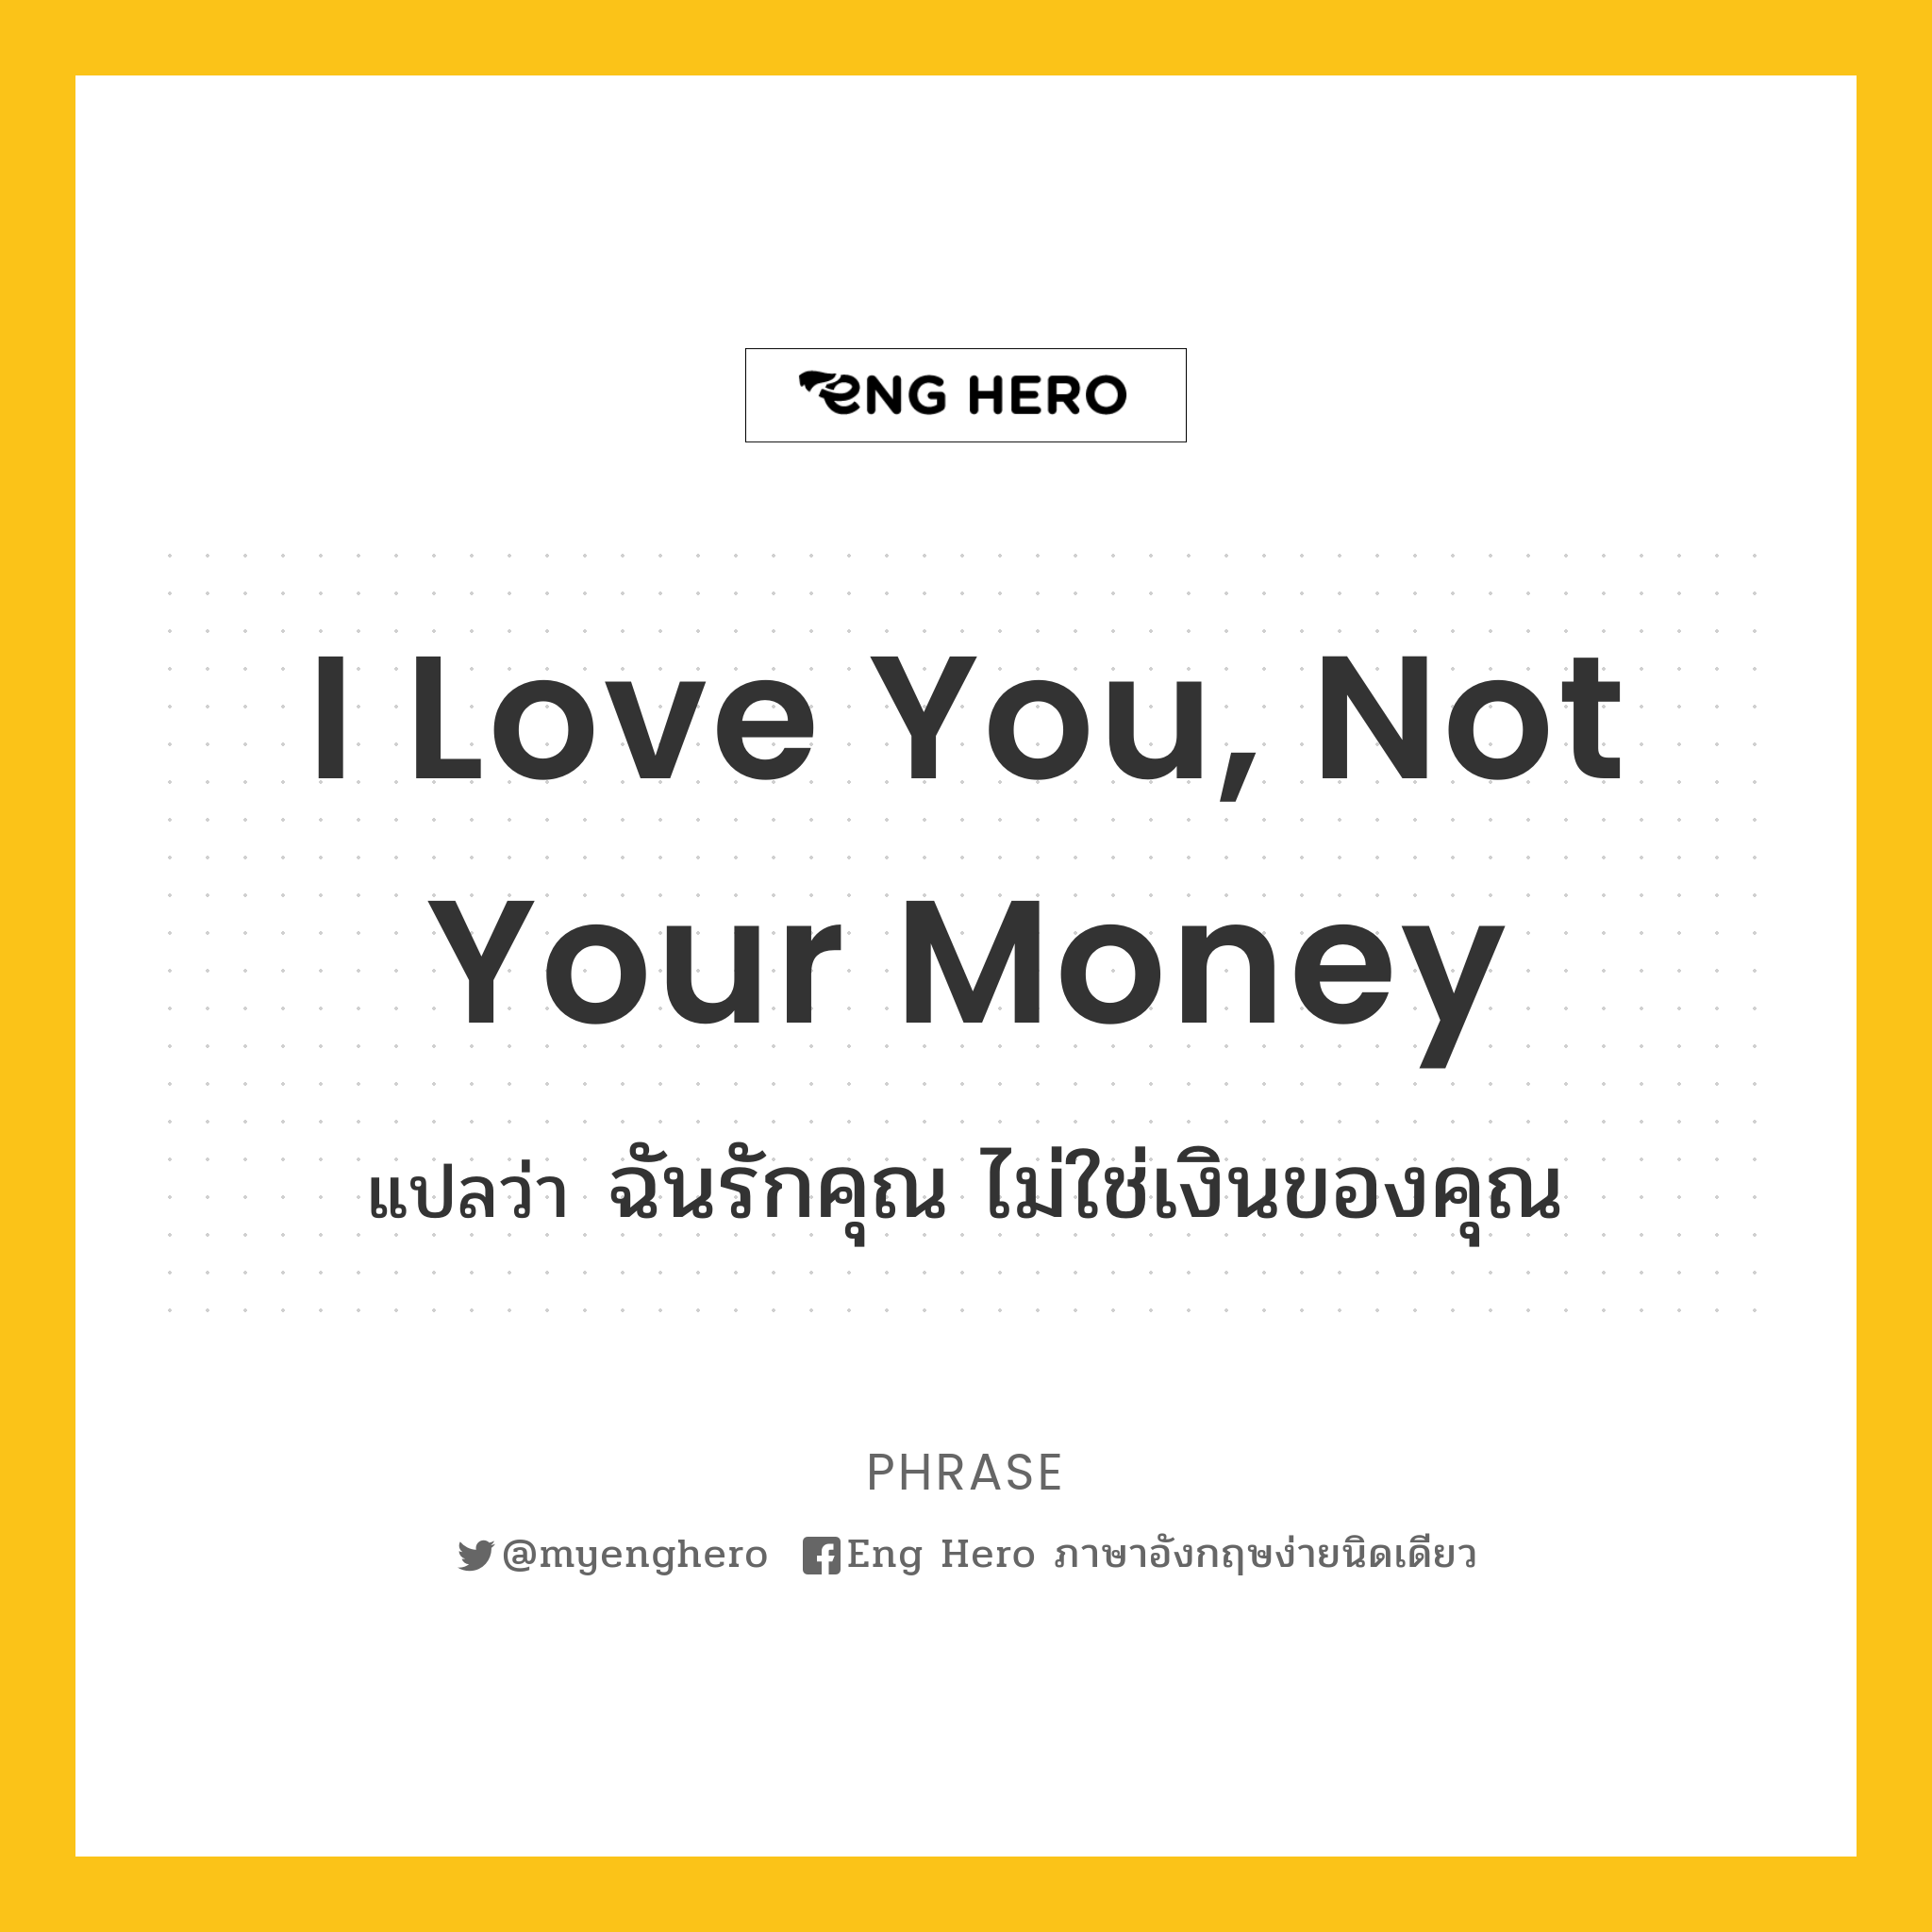 I love you, not your money